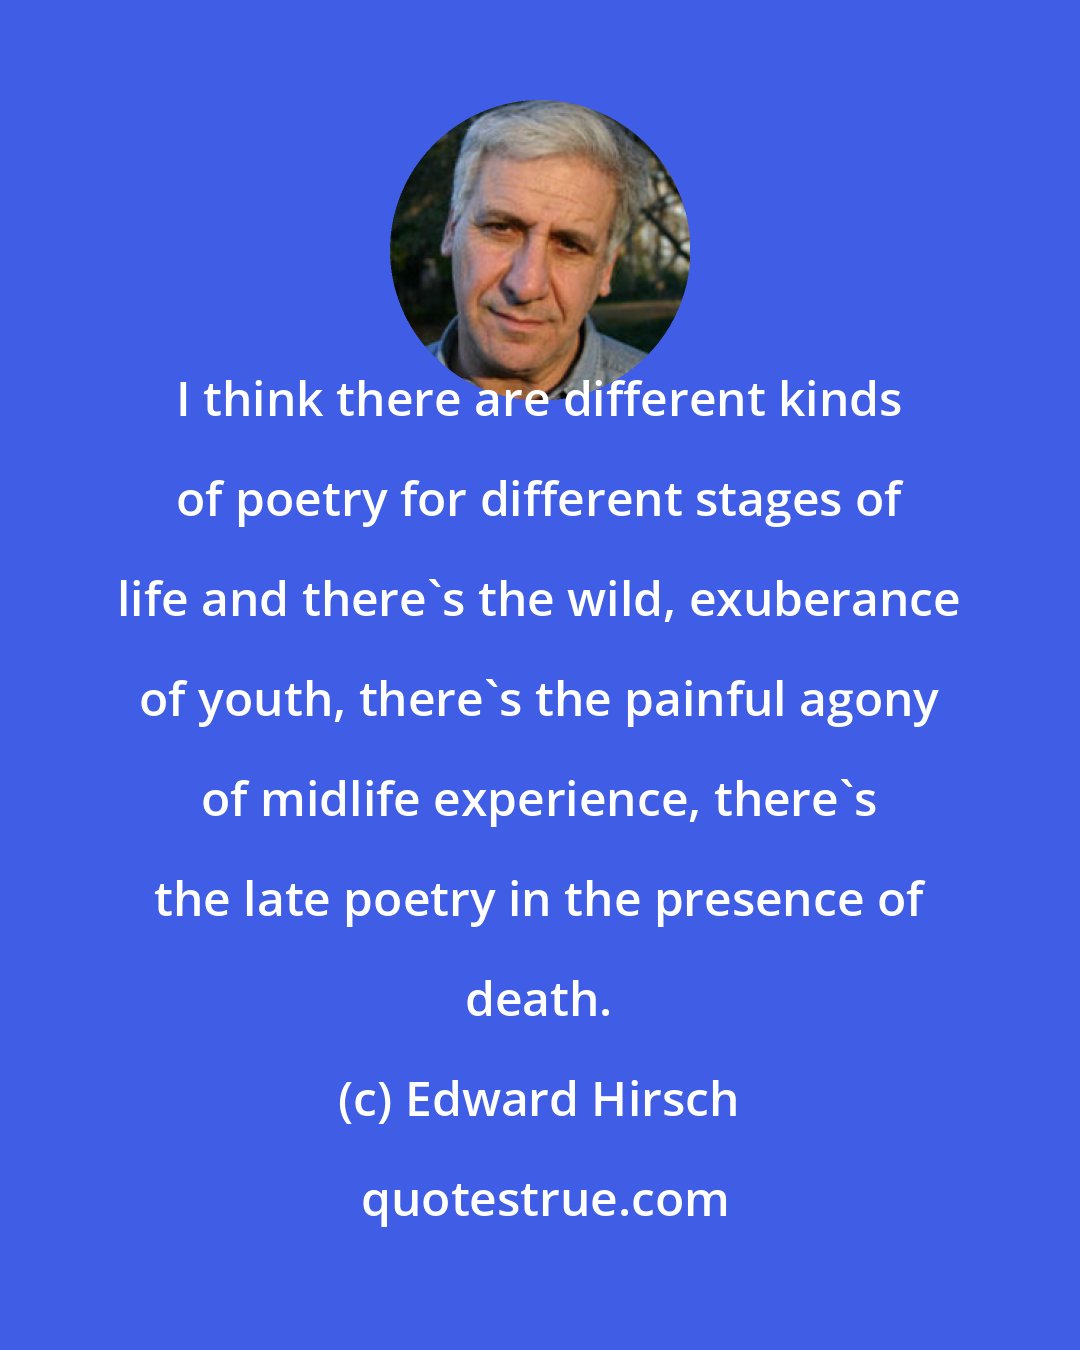 Edward Hirsch: I think there are different kinds of poetry for different stages of life and there's the wild, exuberance of youth, there's the painful agony of midlife experience, there's the late poetry in the presence of death.